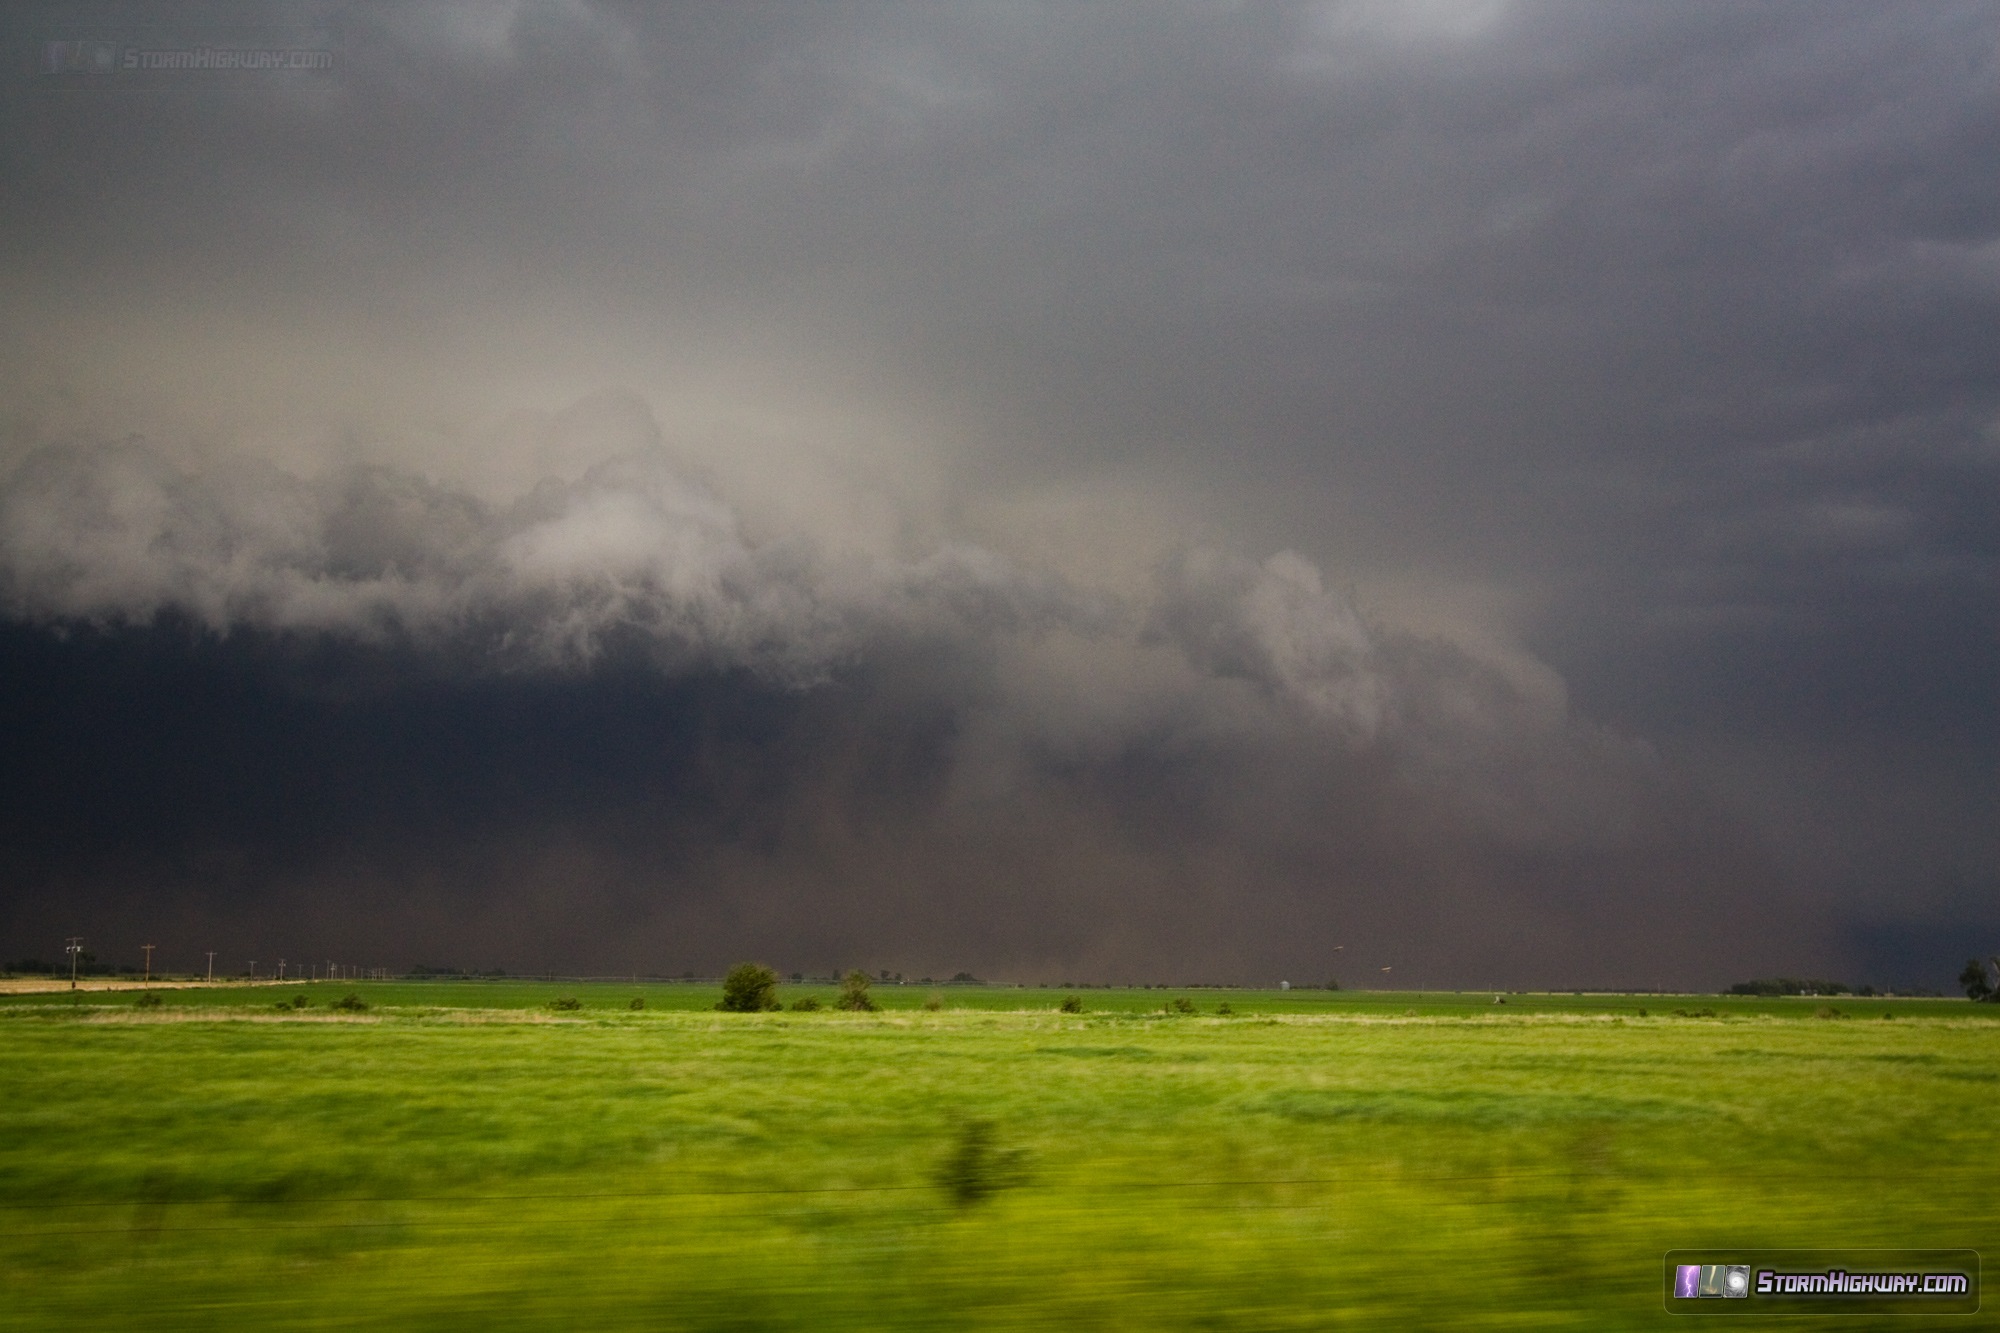 Supercell outflow with dirt plumes - Osceola, Nebraska - June 3, 2014